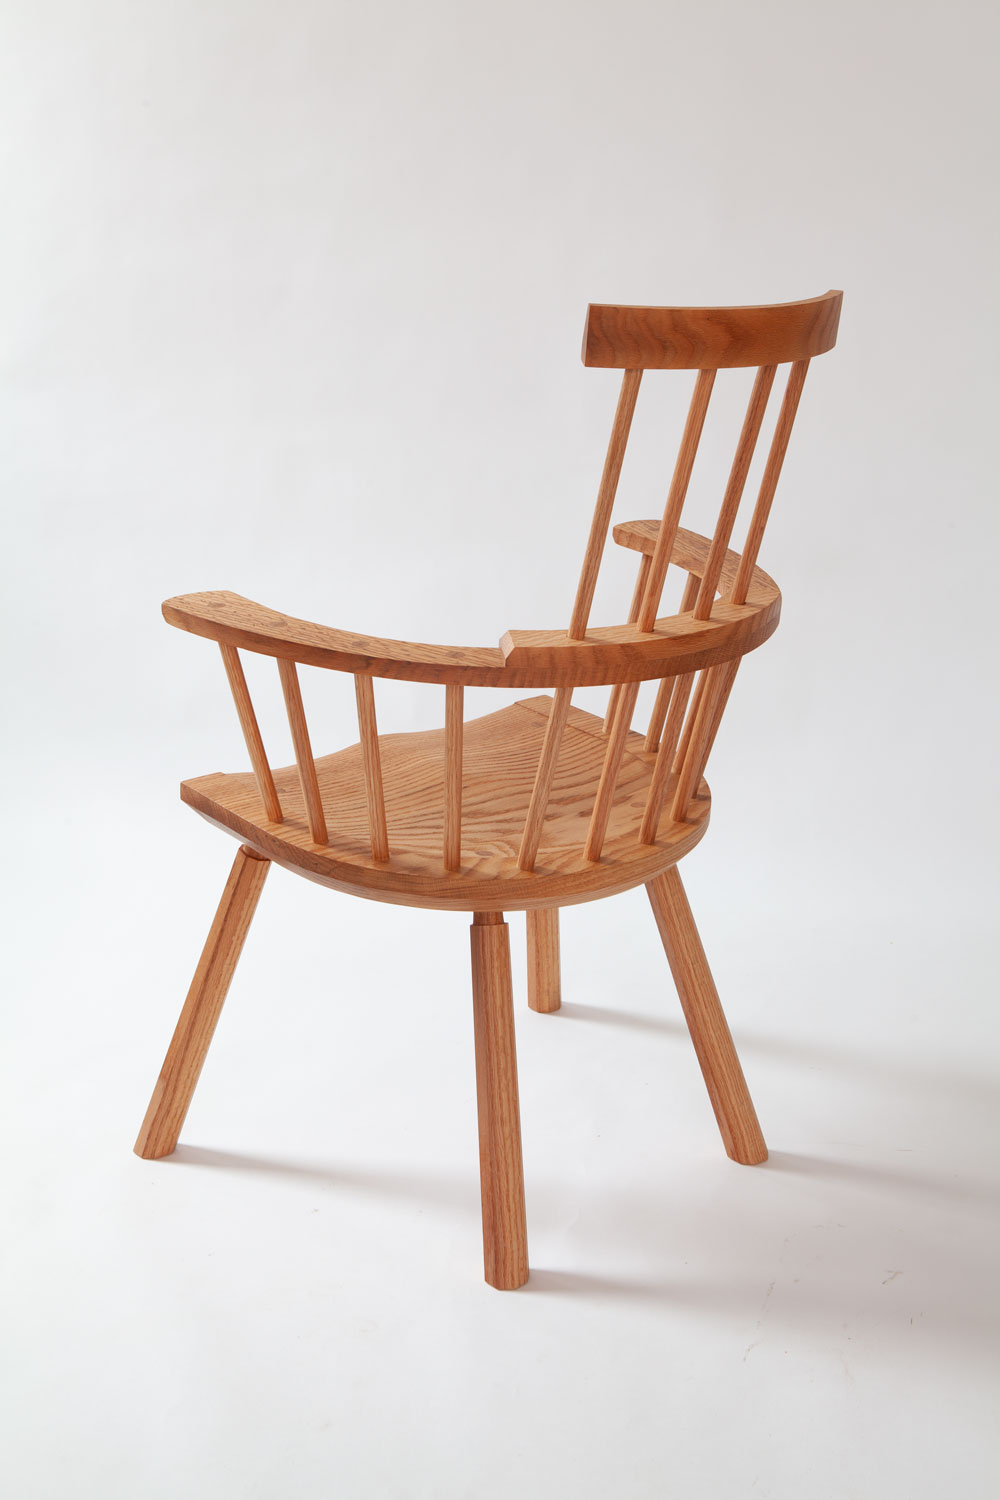 stick_chair_4950_rear_IMG_7271